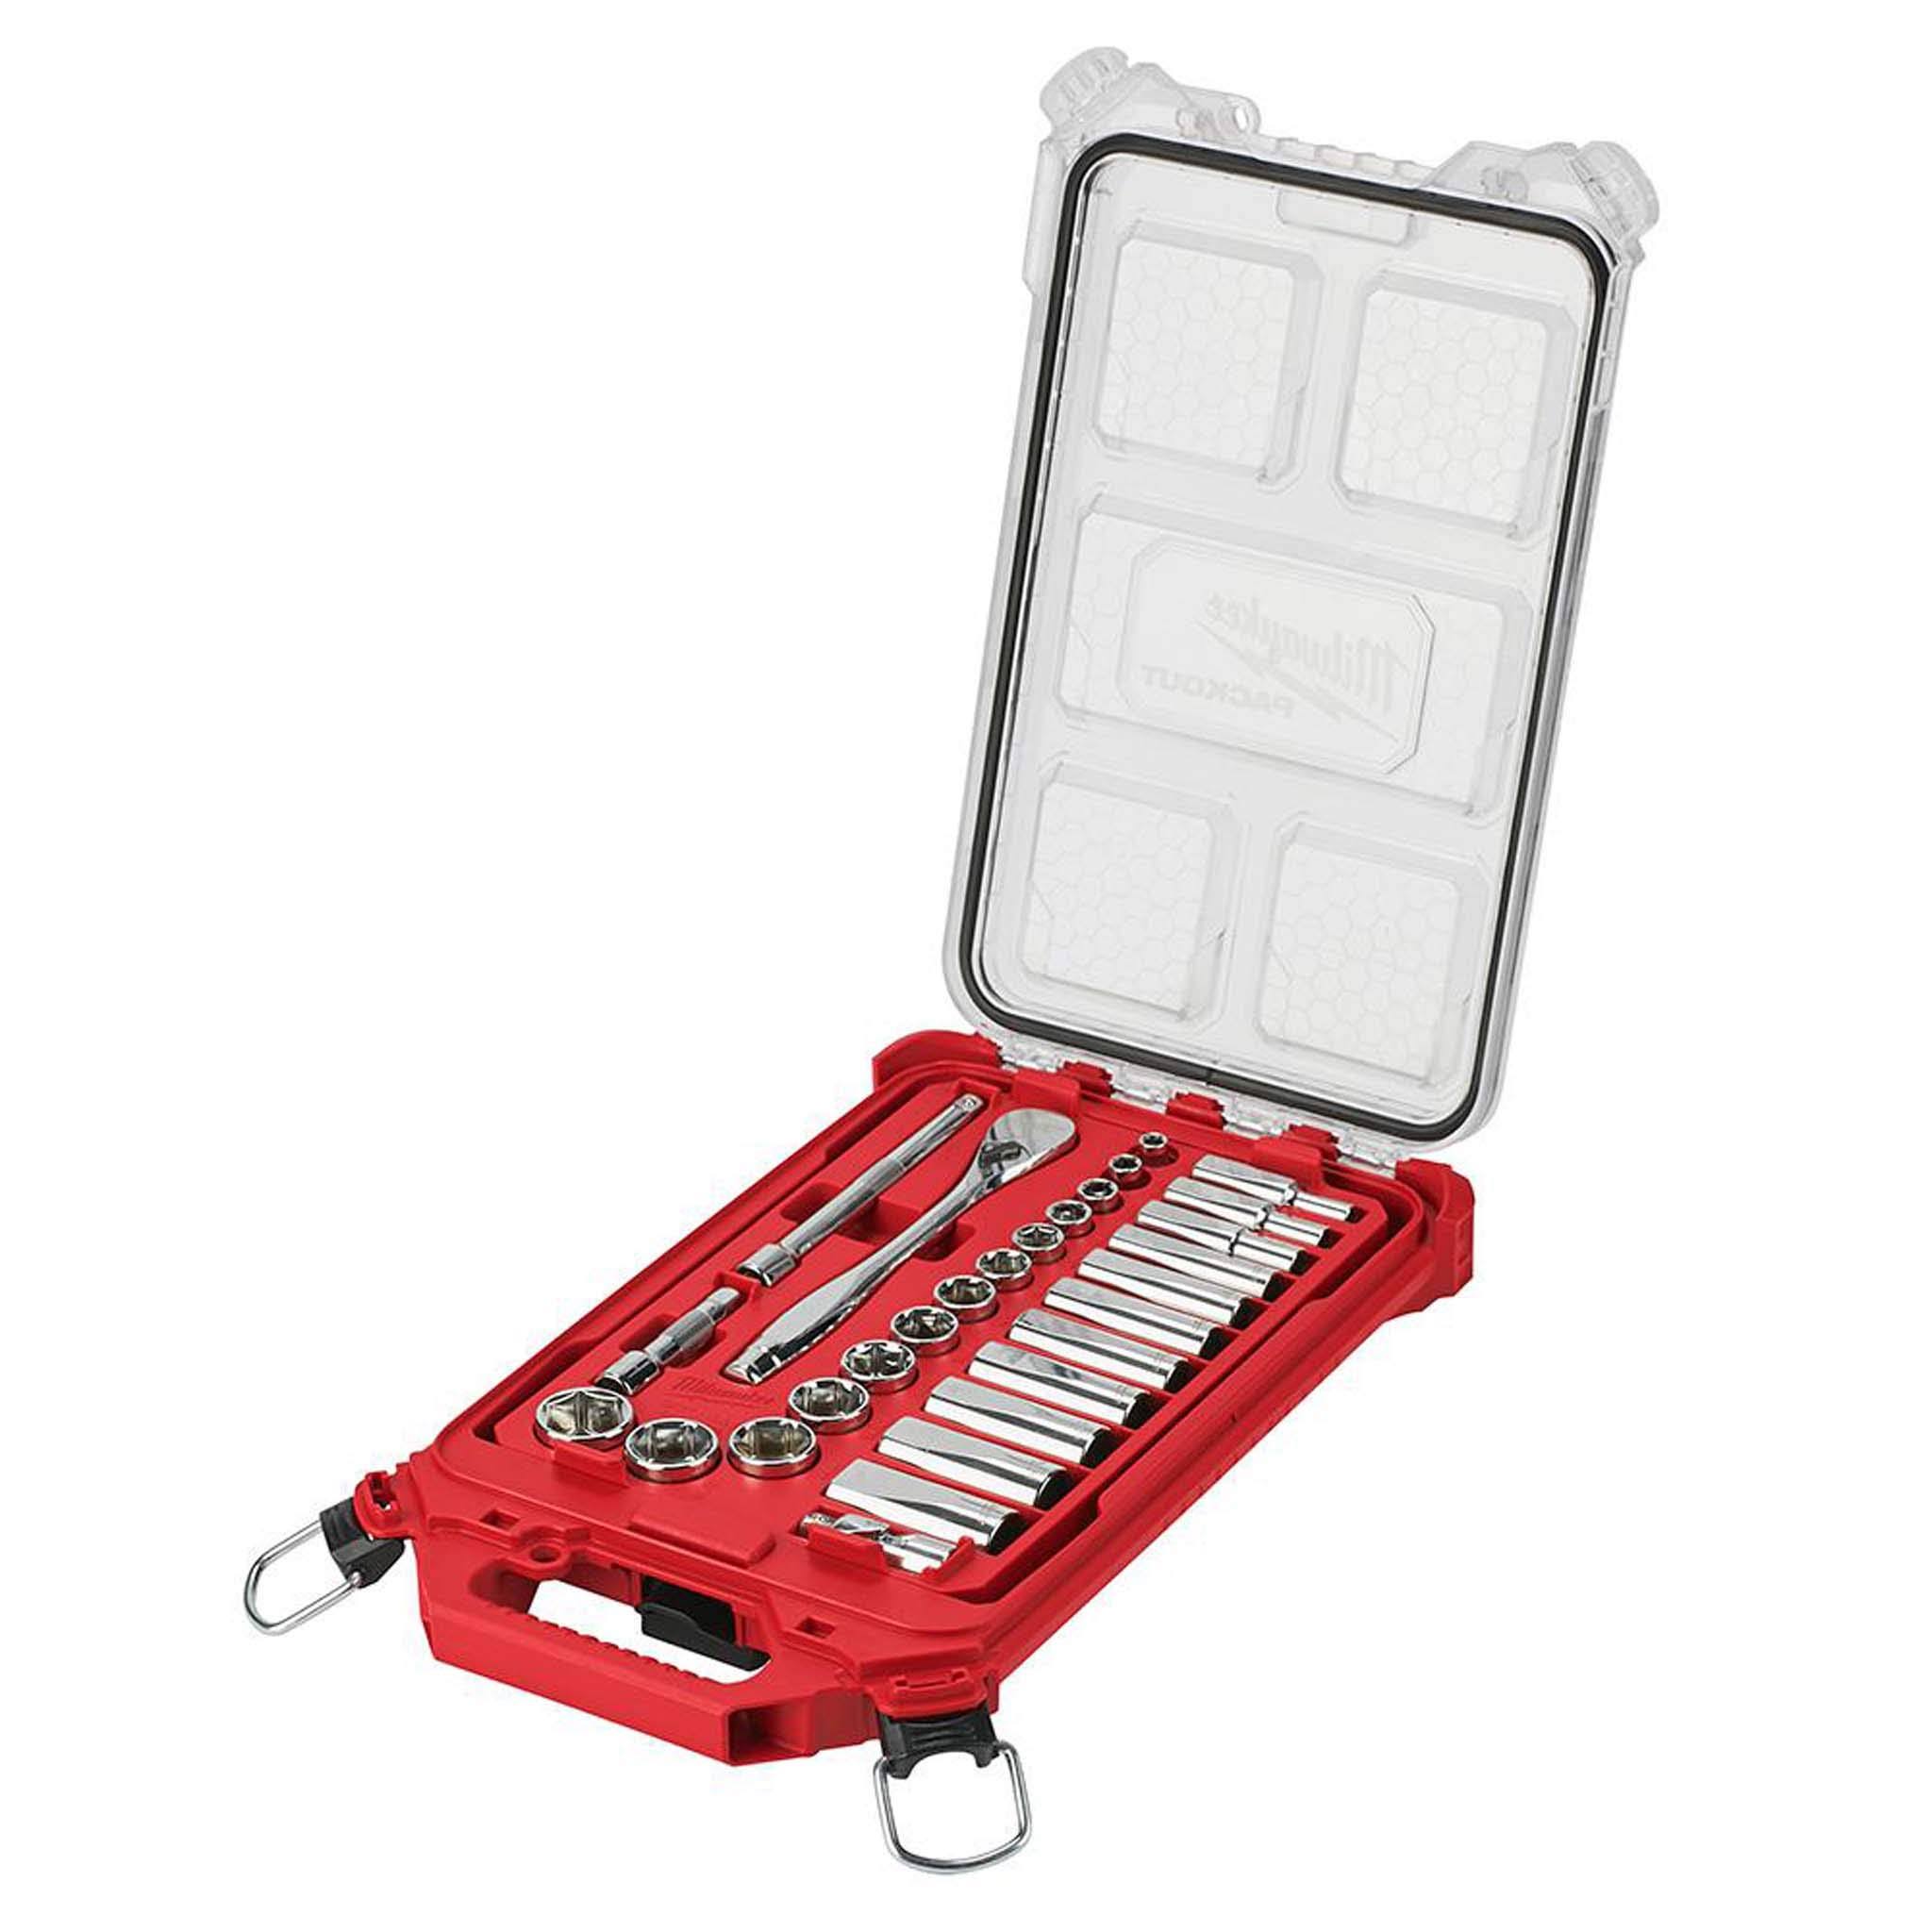 Milwaukee 48-22-9481 SAE Ratchet and Socket Set, Alloy Steel, Chrome, Specifications: 3/8 in Drive